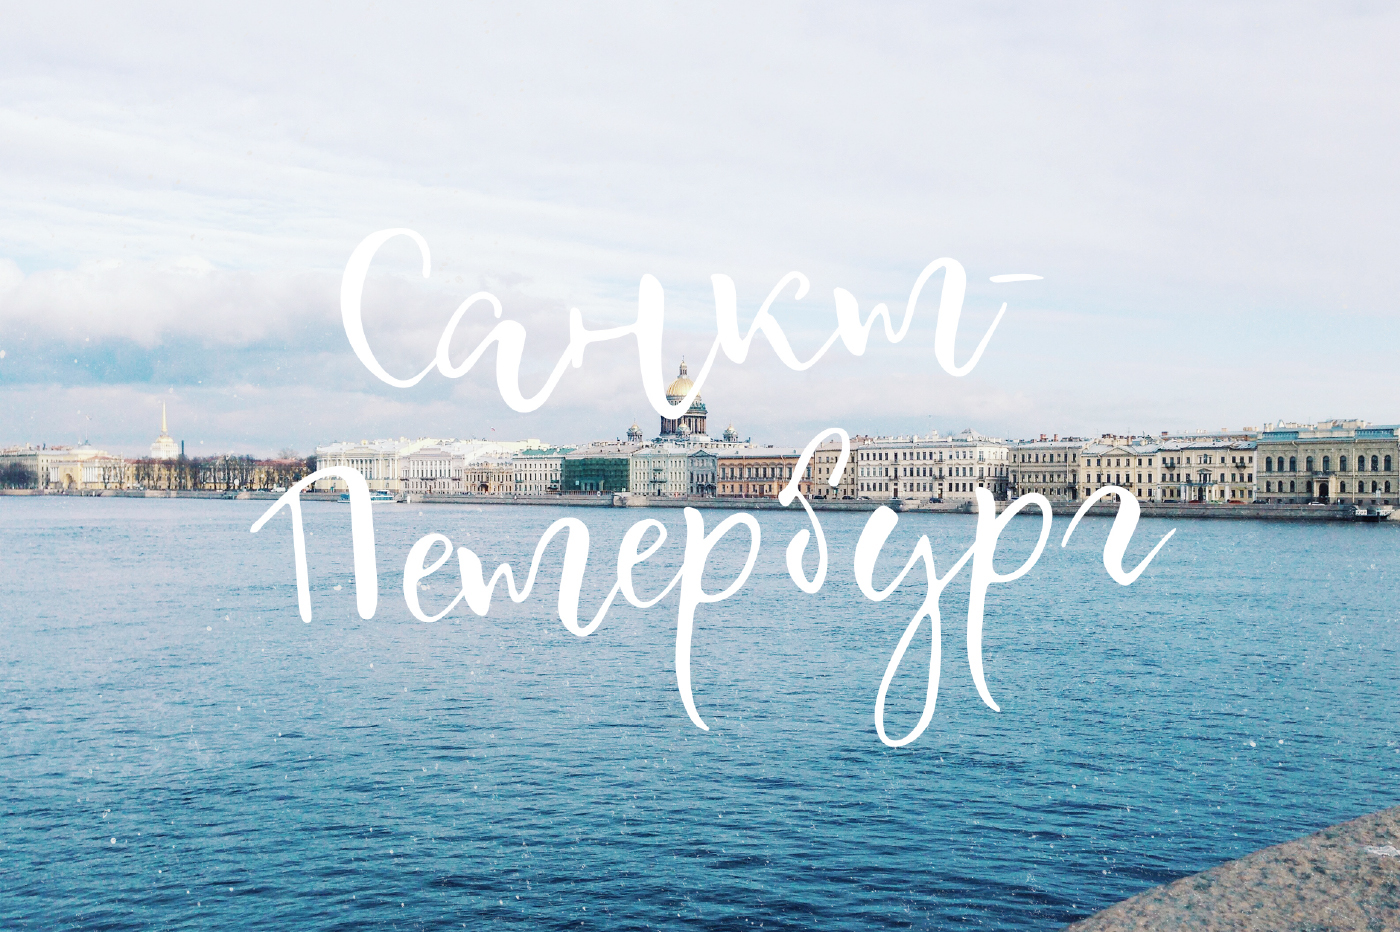 Free font font Cyrillic Calligraphy   Typeface free typeface